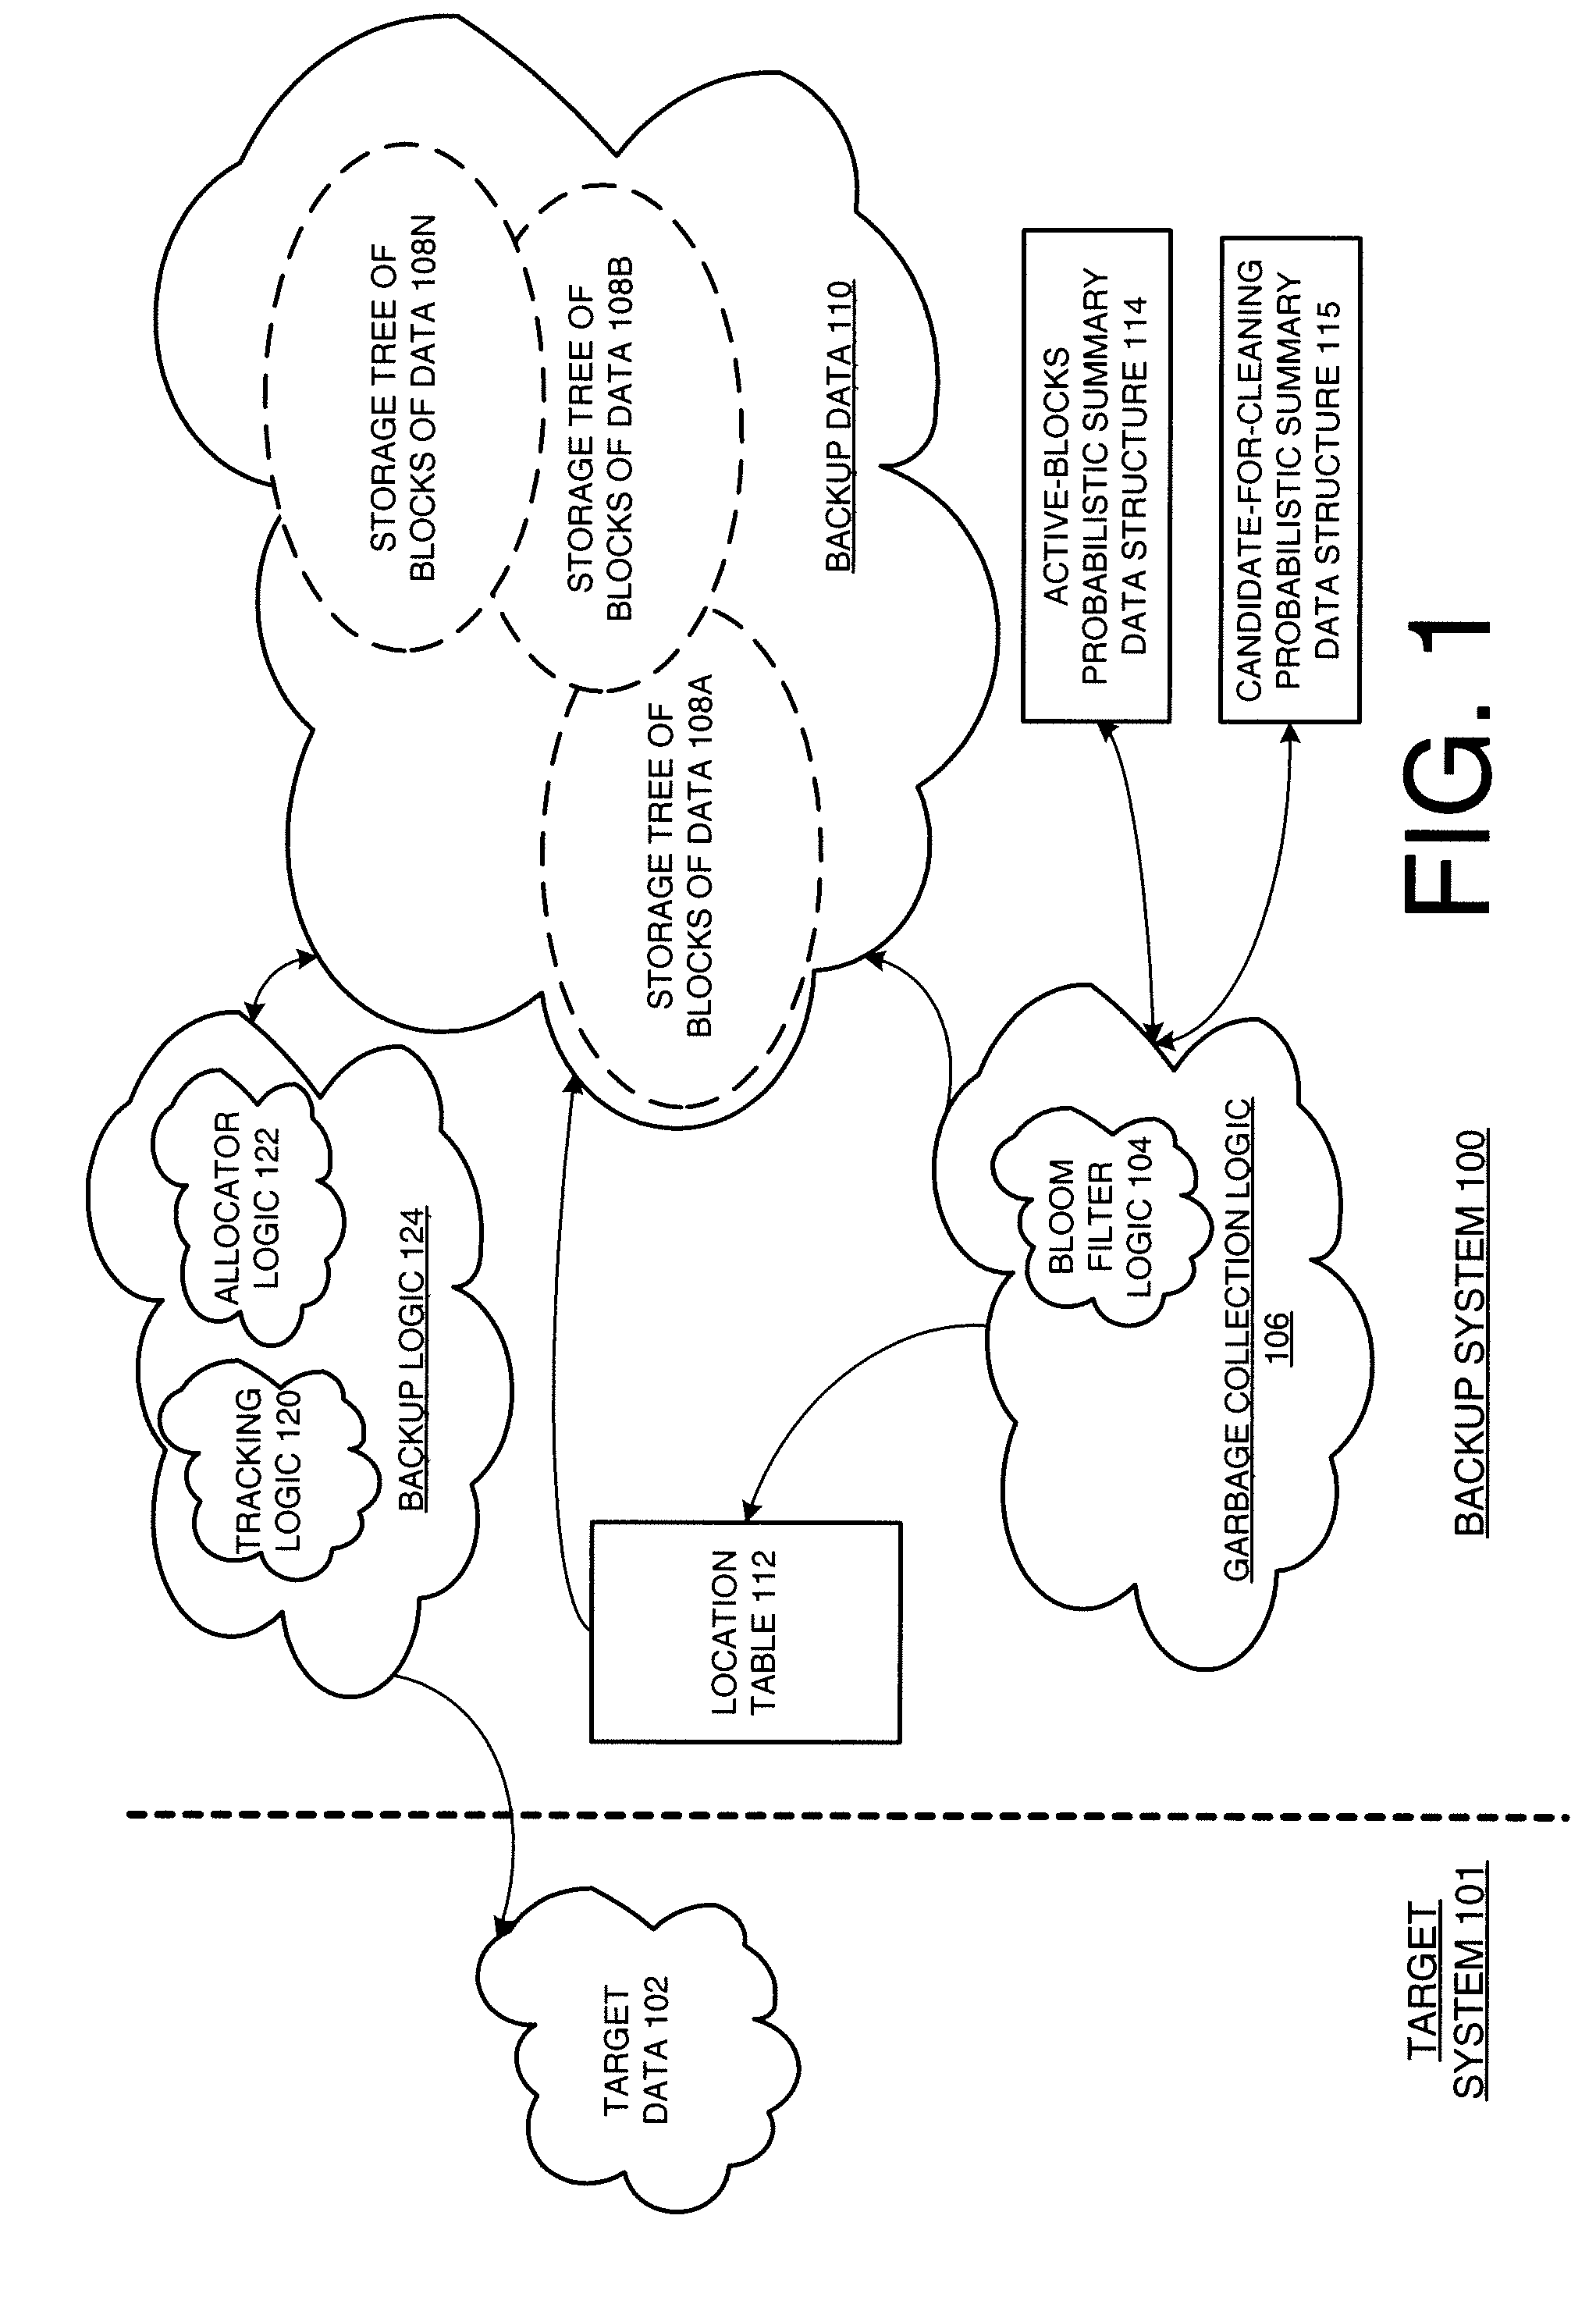 Probabilistic summary data structure based encoding for garbage collection